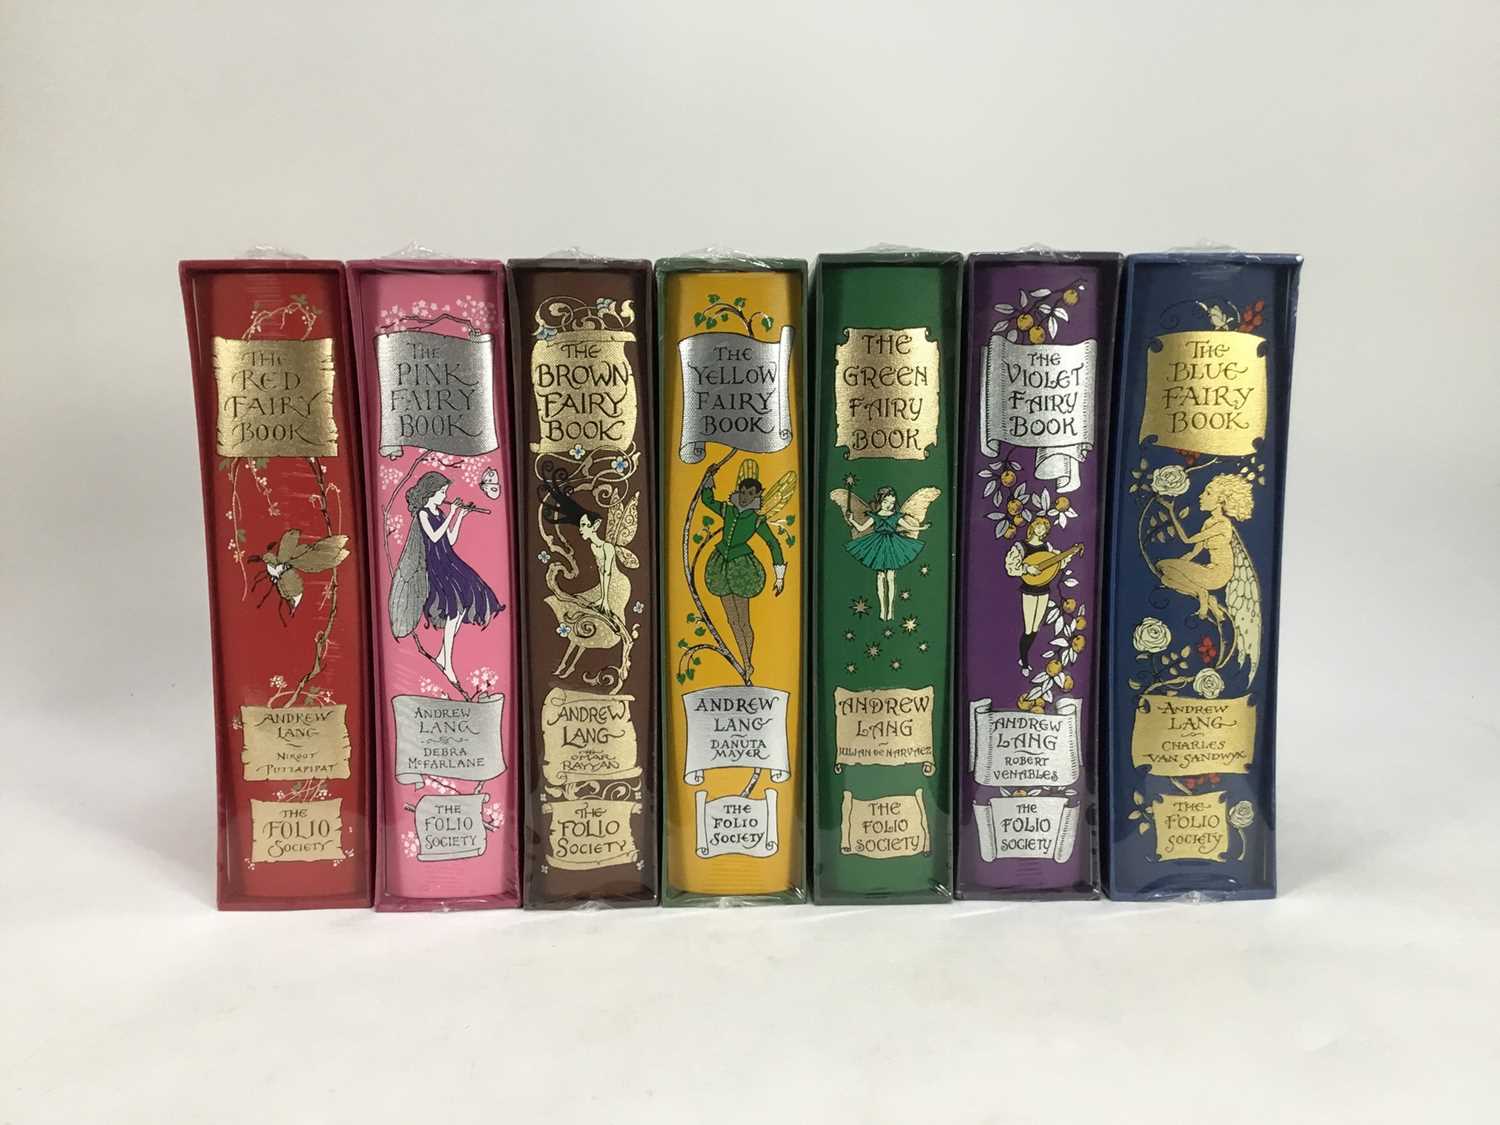 Seven Folio Society Rainbow Fairy Books by Andrew Lang, still sealed in original plastic wrapping